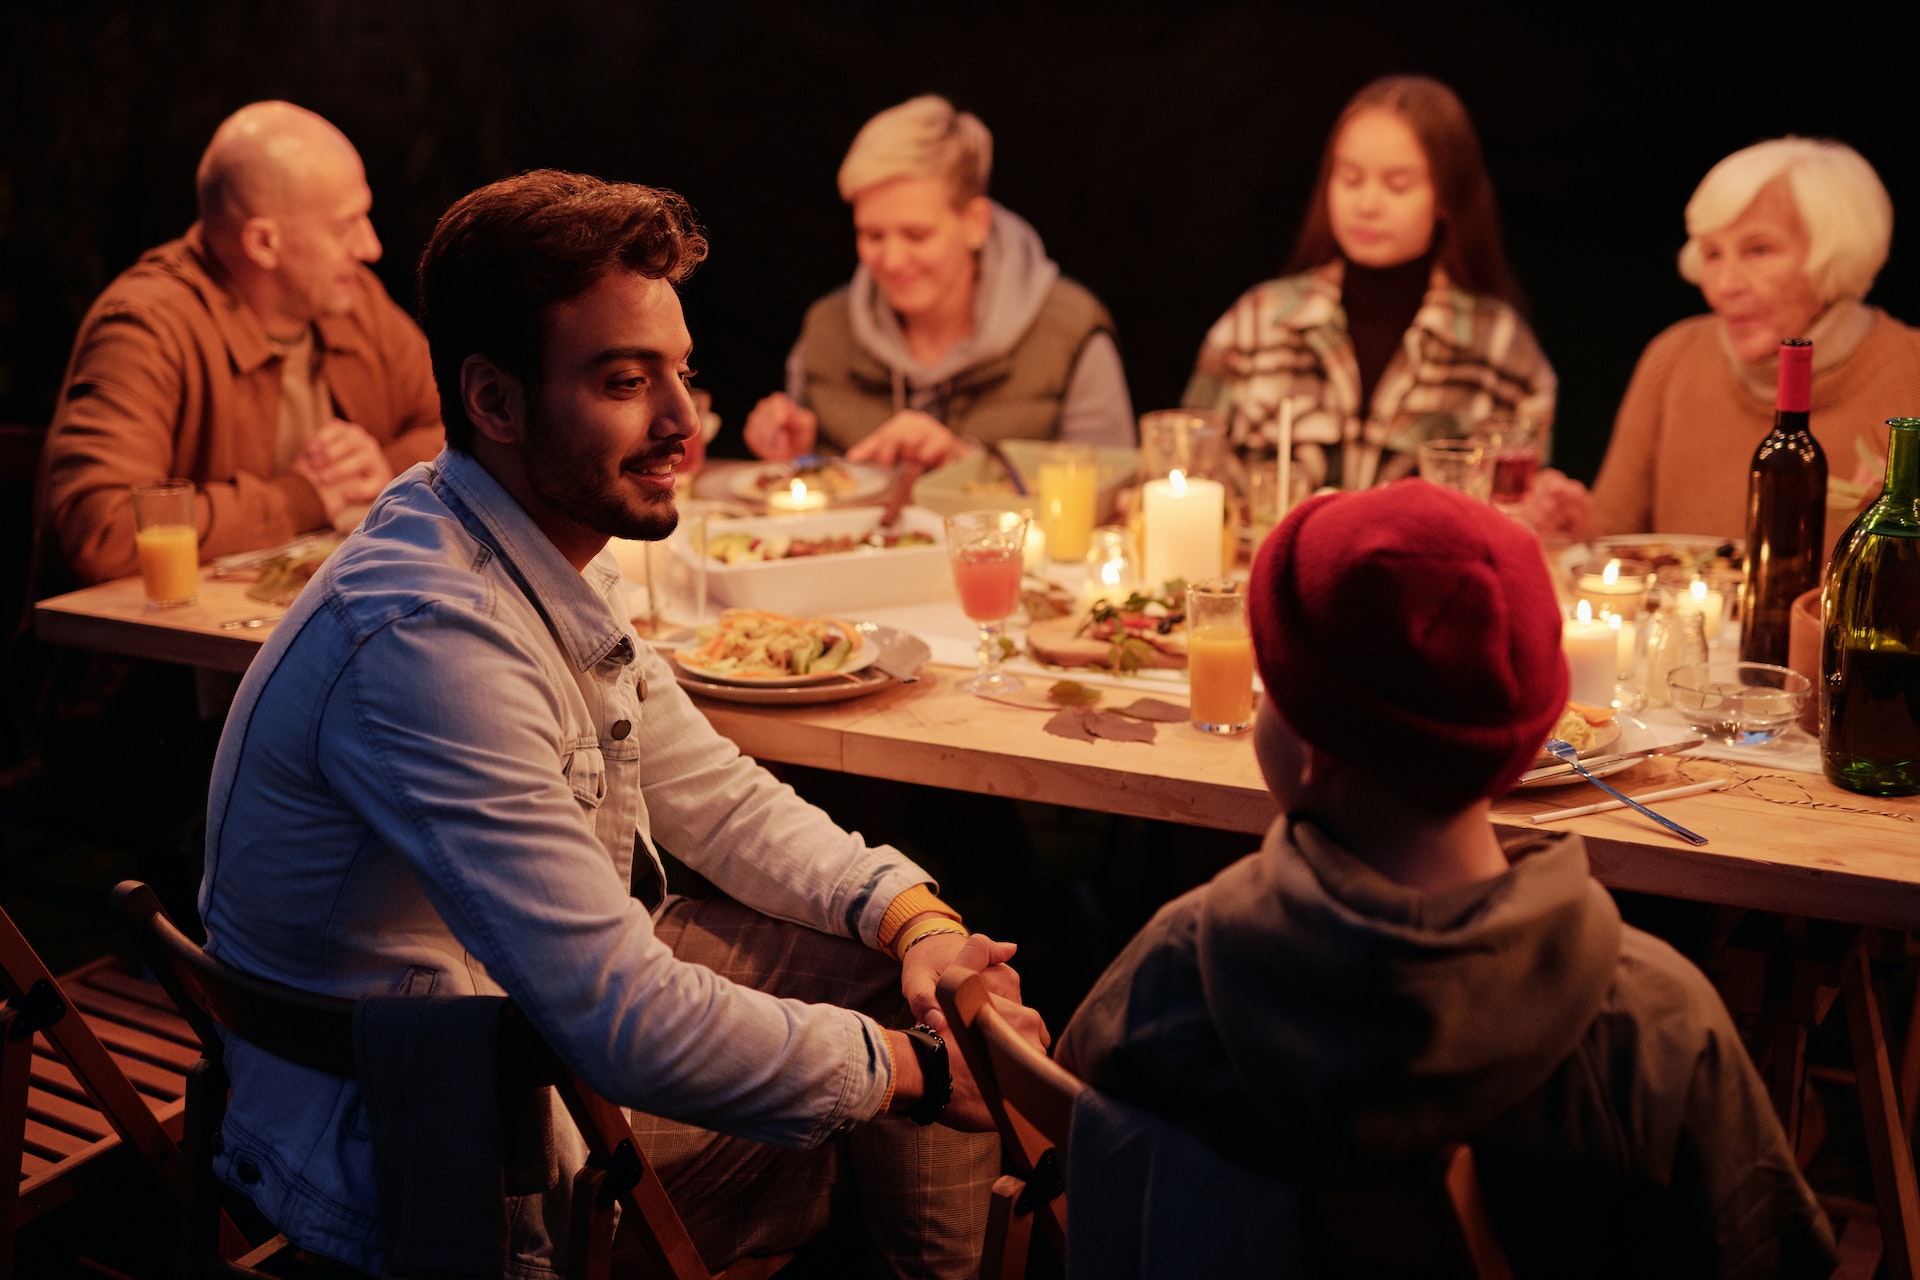 People chatting while having dinner | Source: Pexels